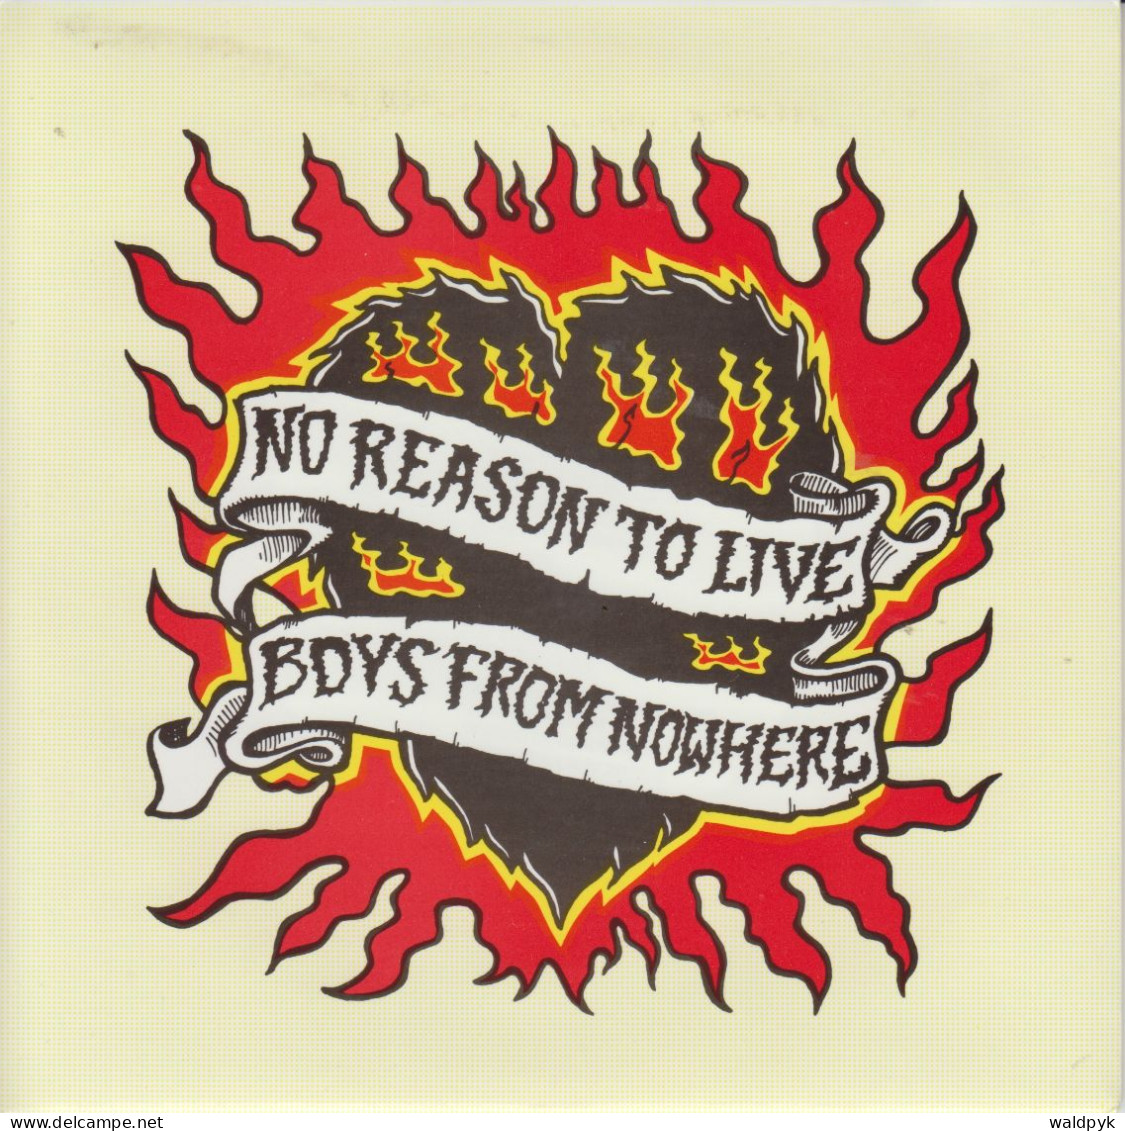 THE BOYS FROM NOWHERE - No Reason To Live - Sonstige - Englische Musik